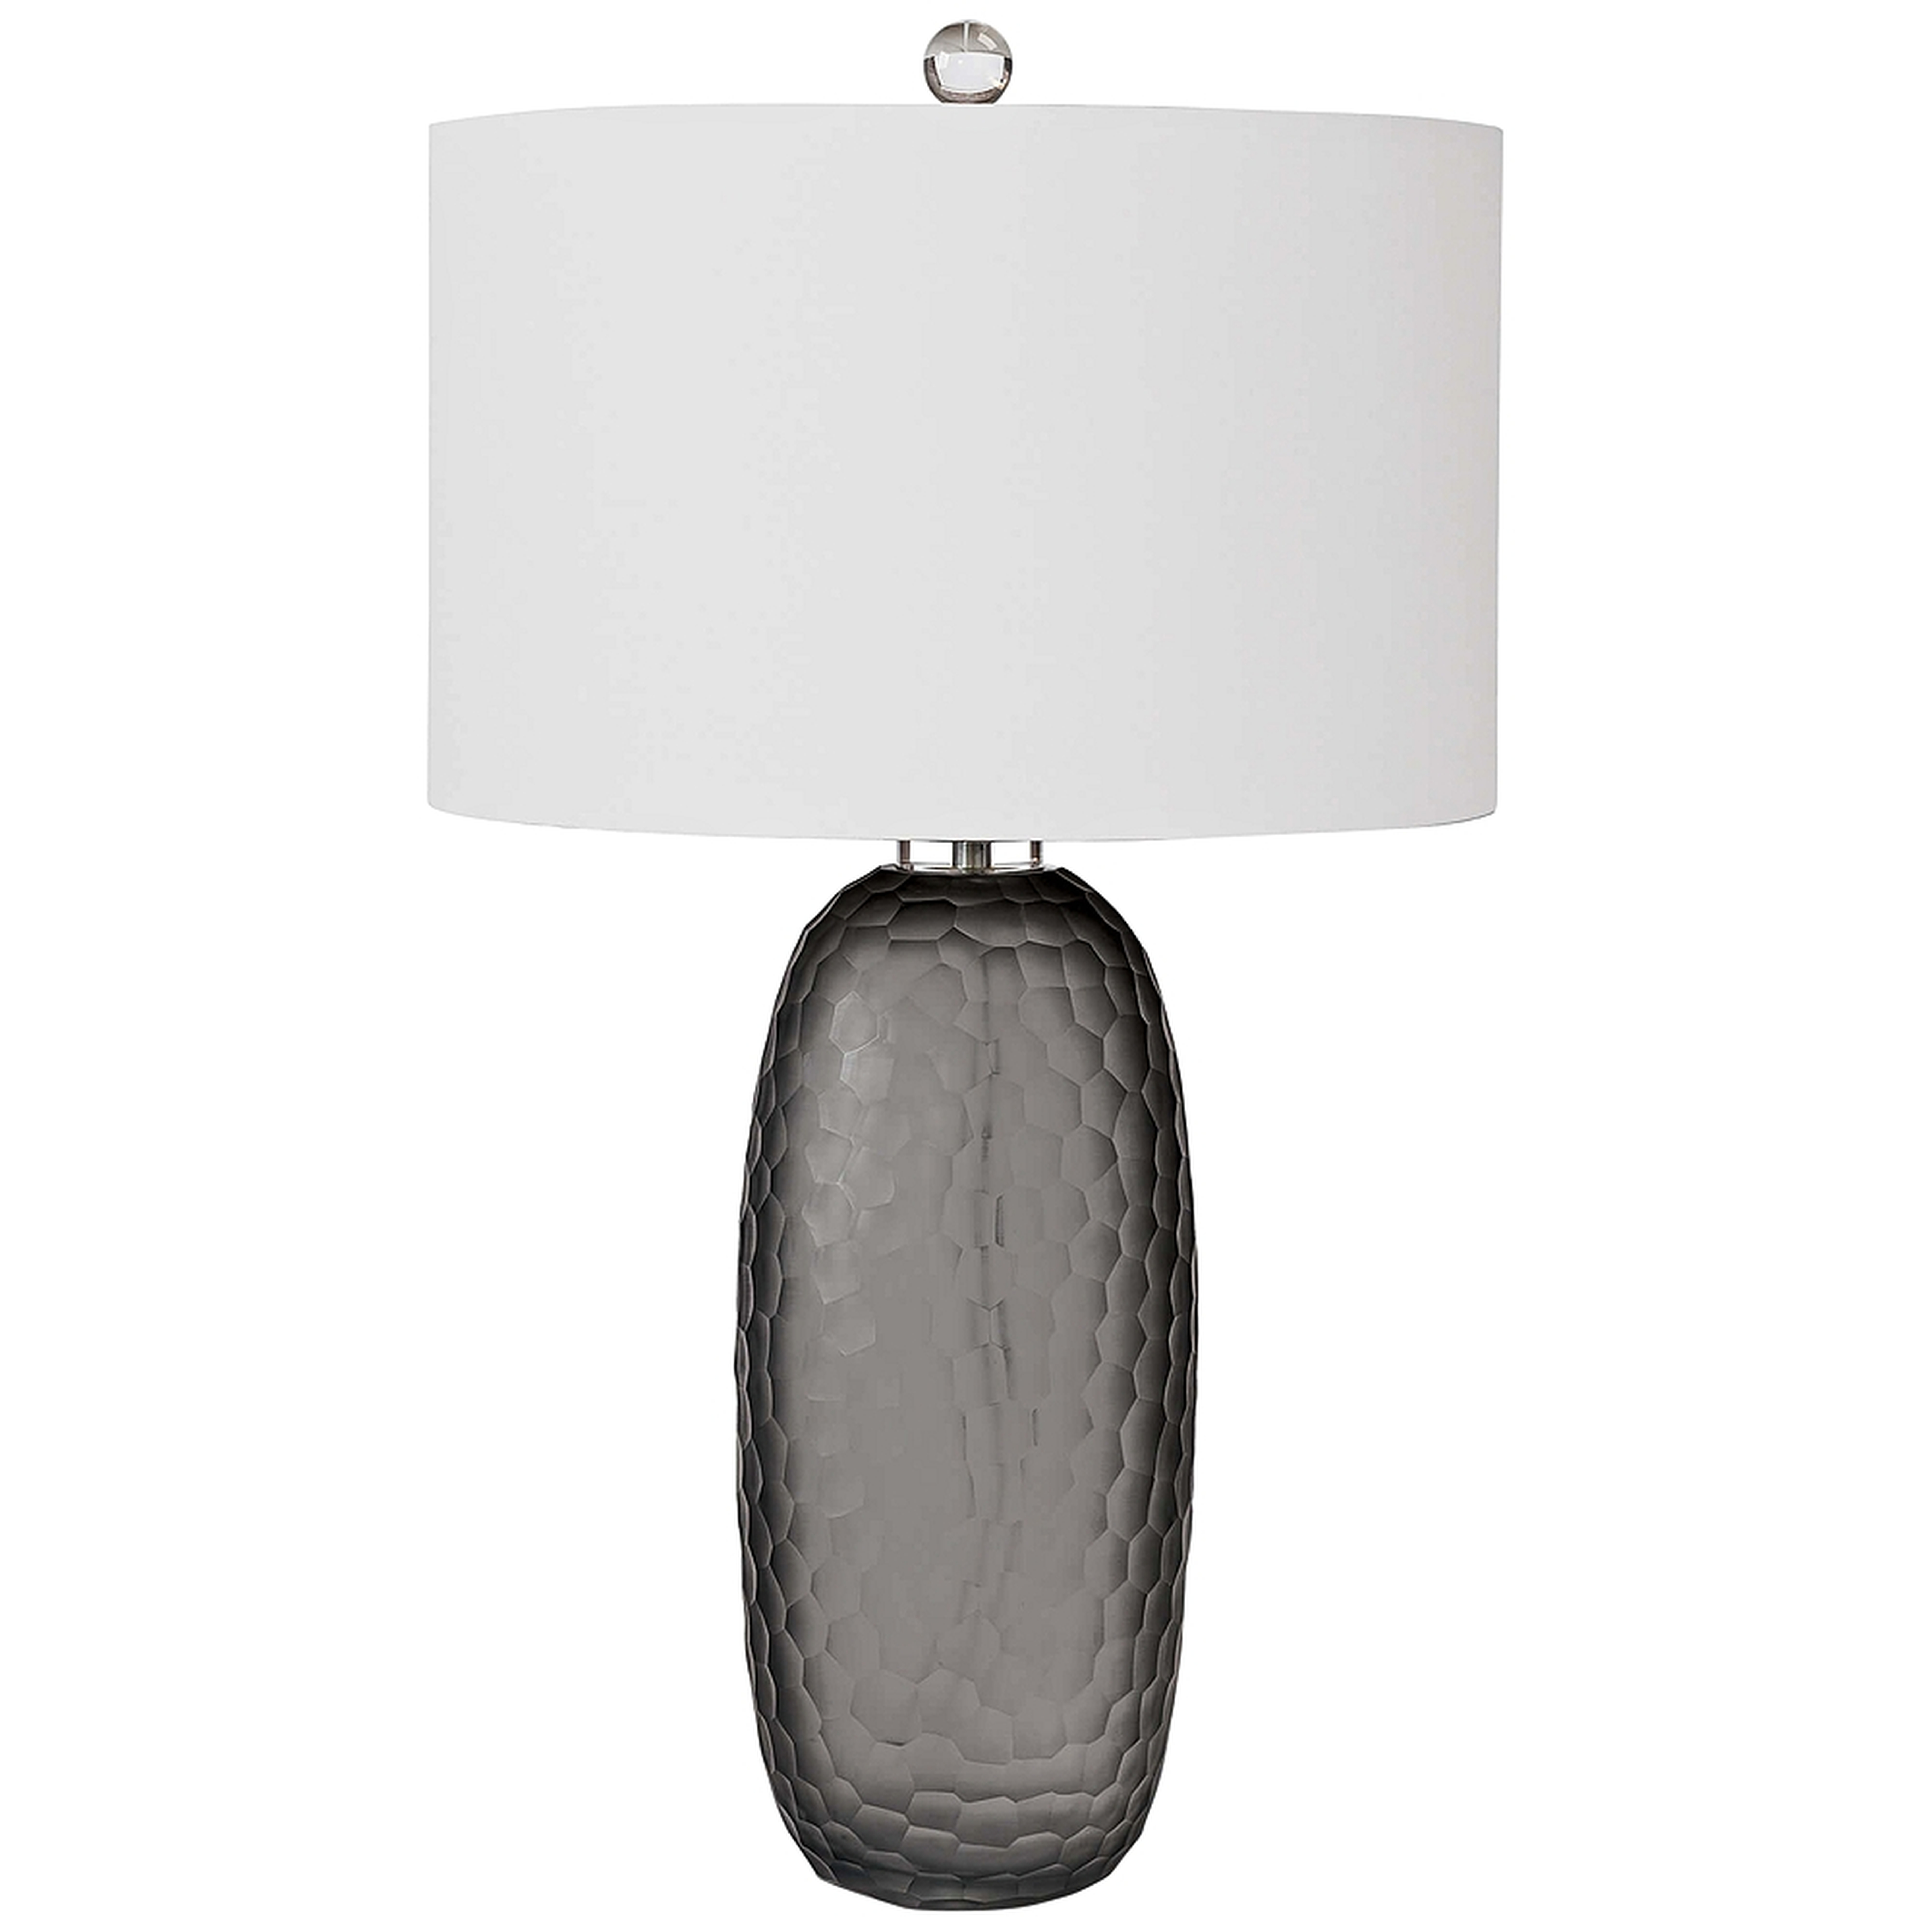 Regina Andrew Honeycomb Glass Table Lamp - Style # 37D12 - Lamps Plus